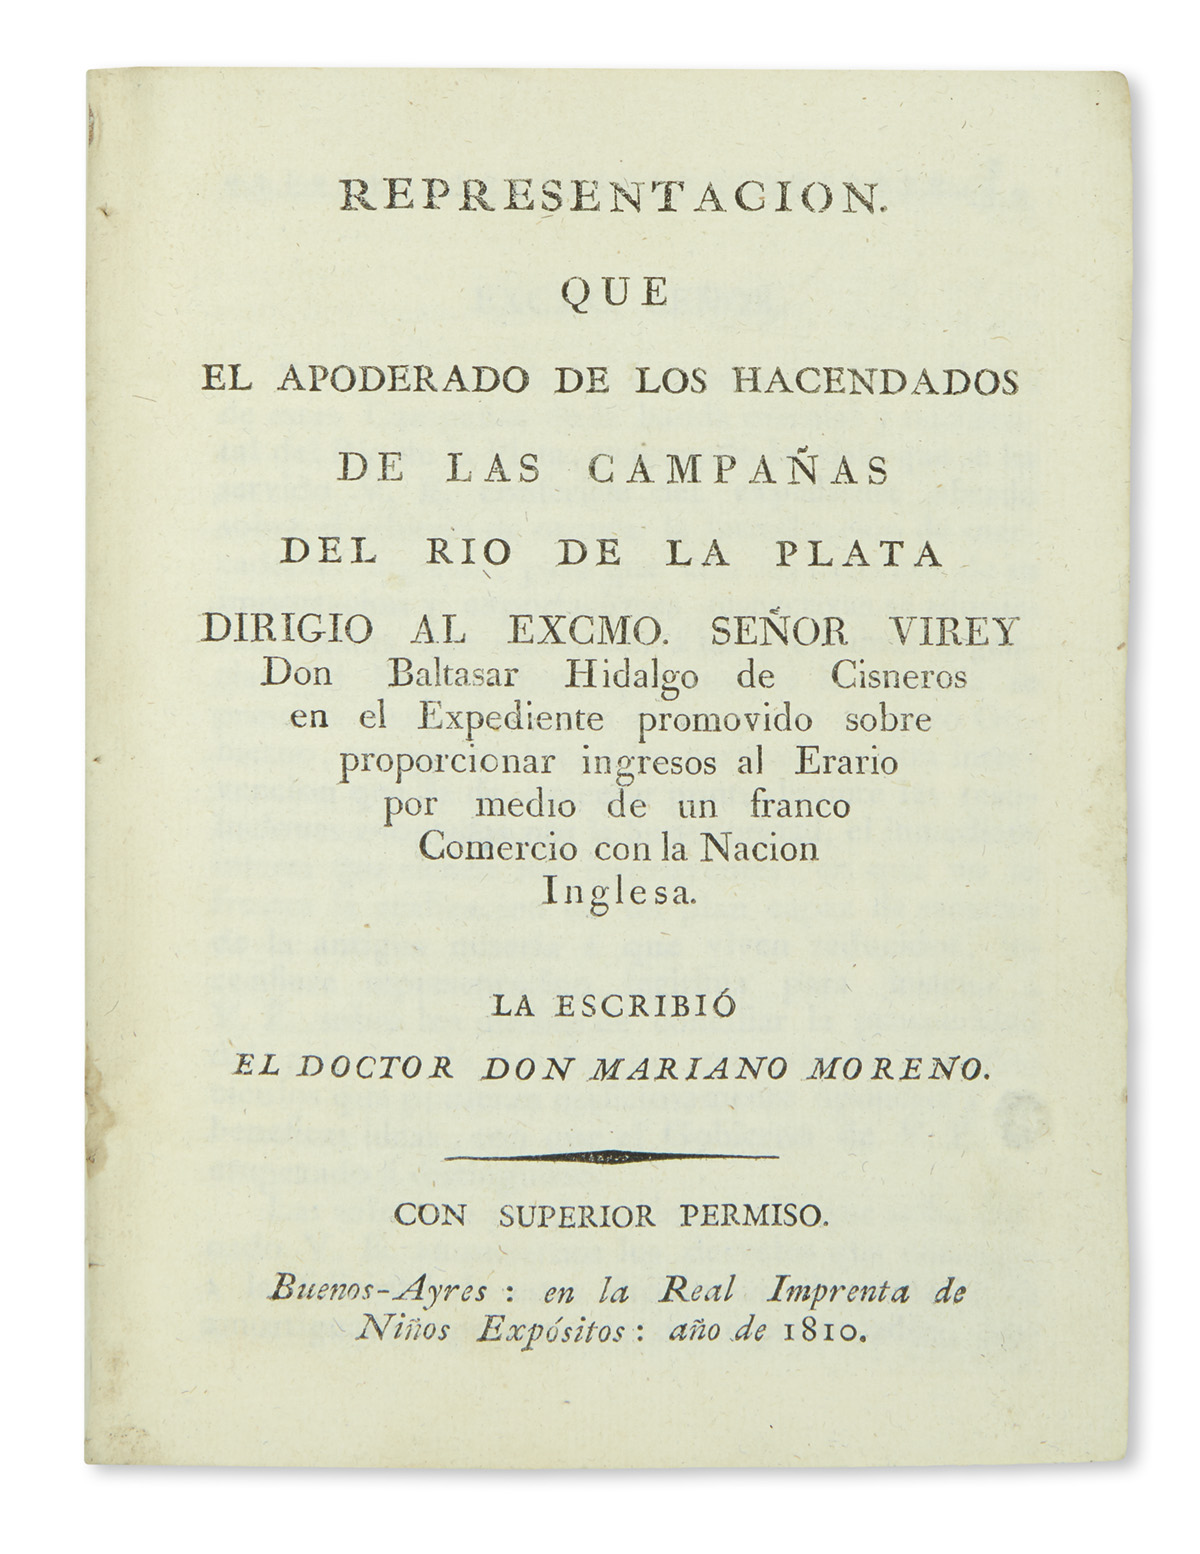 (ARGENTINA.) Compilation of works printed in Buenos Aires in 1810, including Morenos important Representacion.